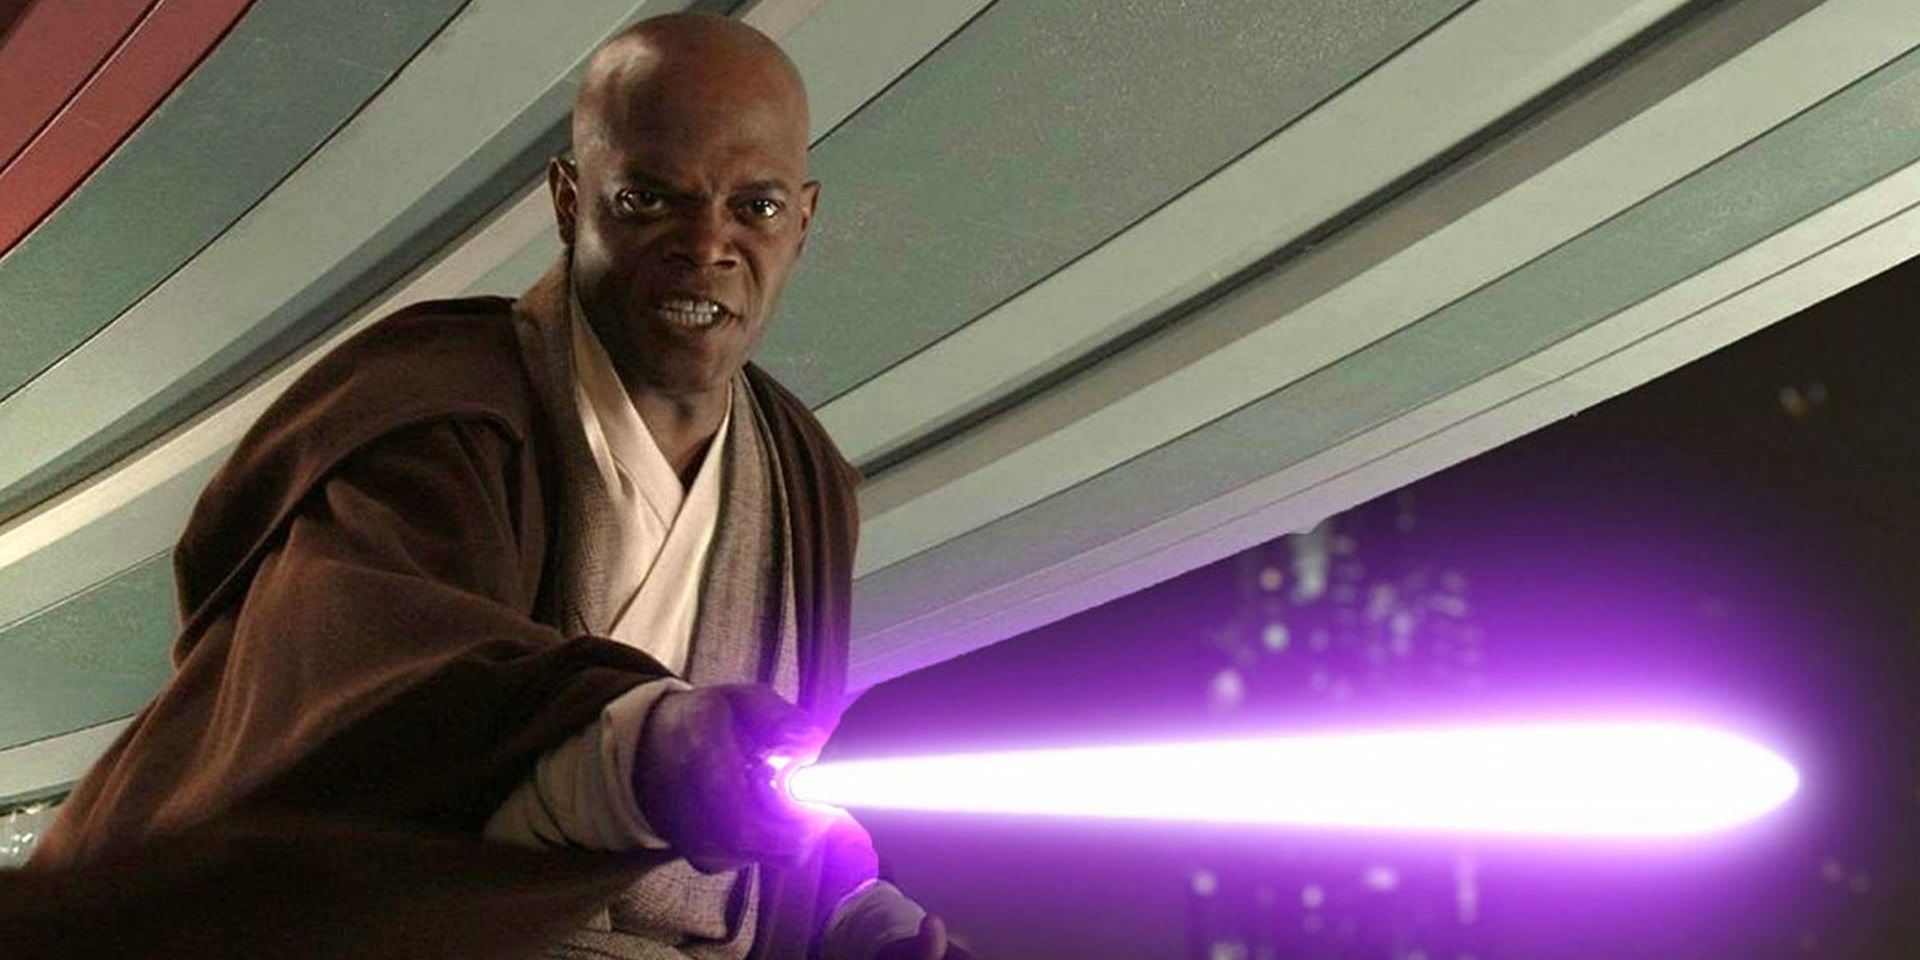 Mace Windu holding his lightsaber to the throat of Darth Sidious in Star Wars Revenge of the Sith